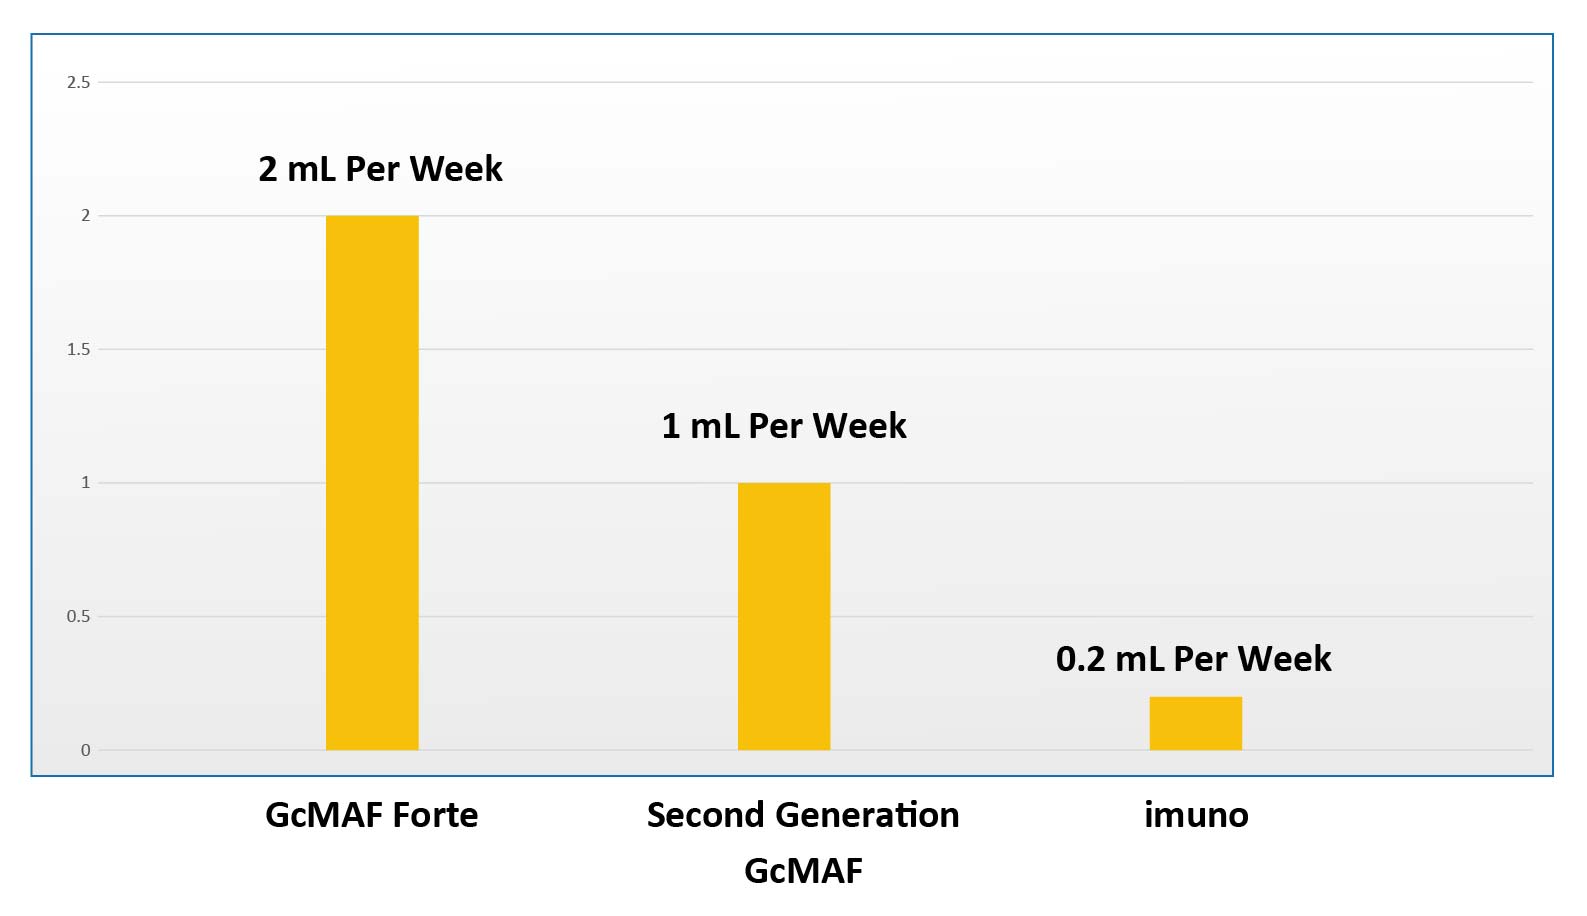 Comparison between the amount needed per week of GcMAF Forte, second generation GcMAF and imuno